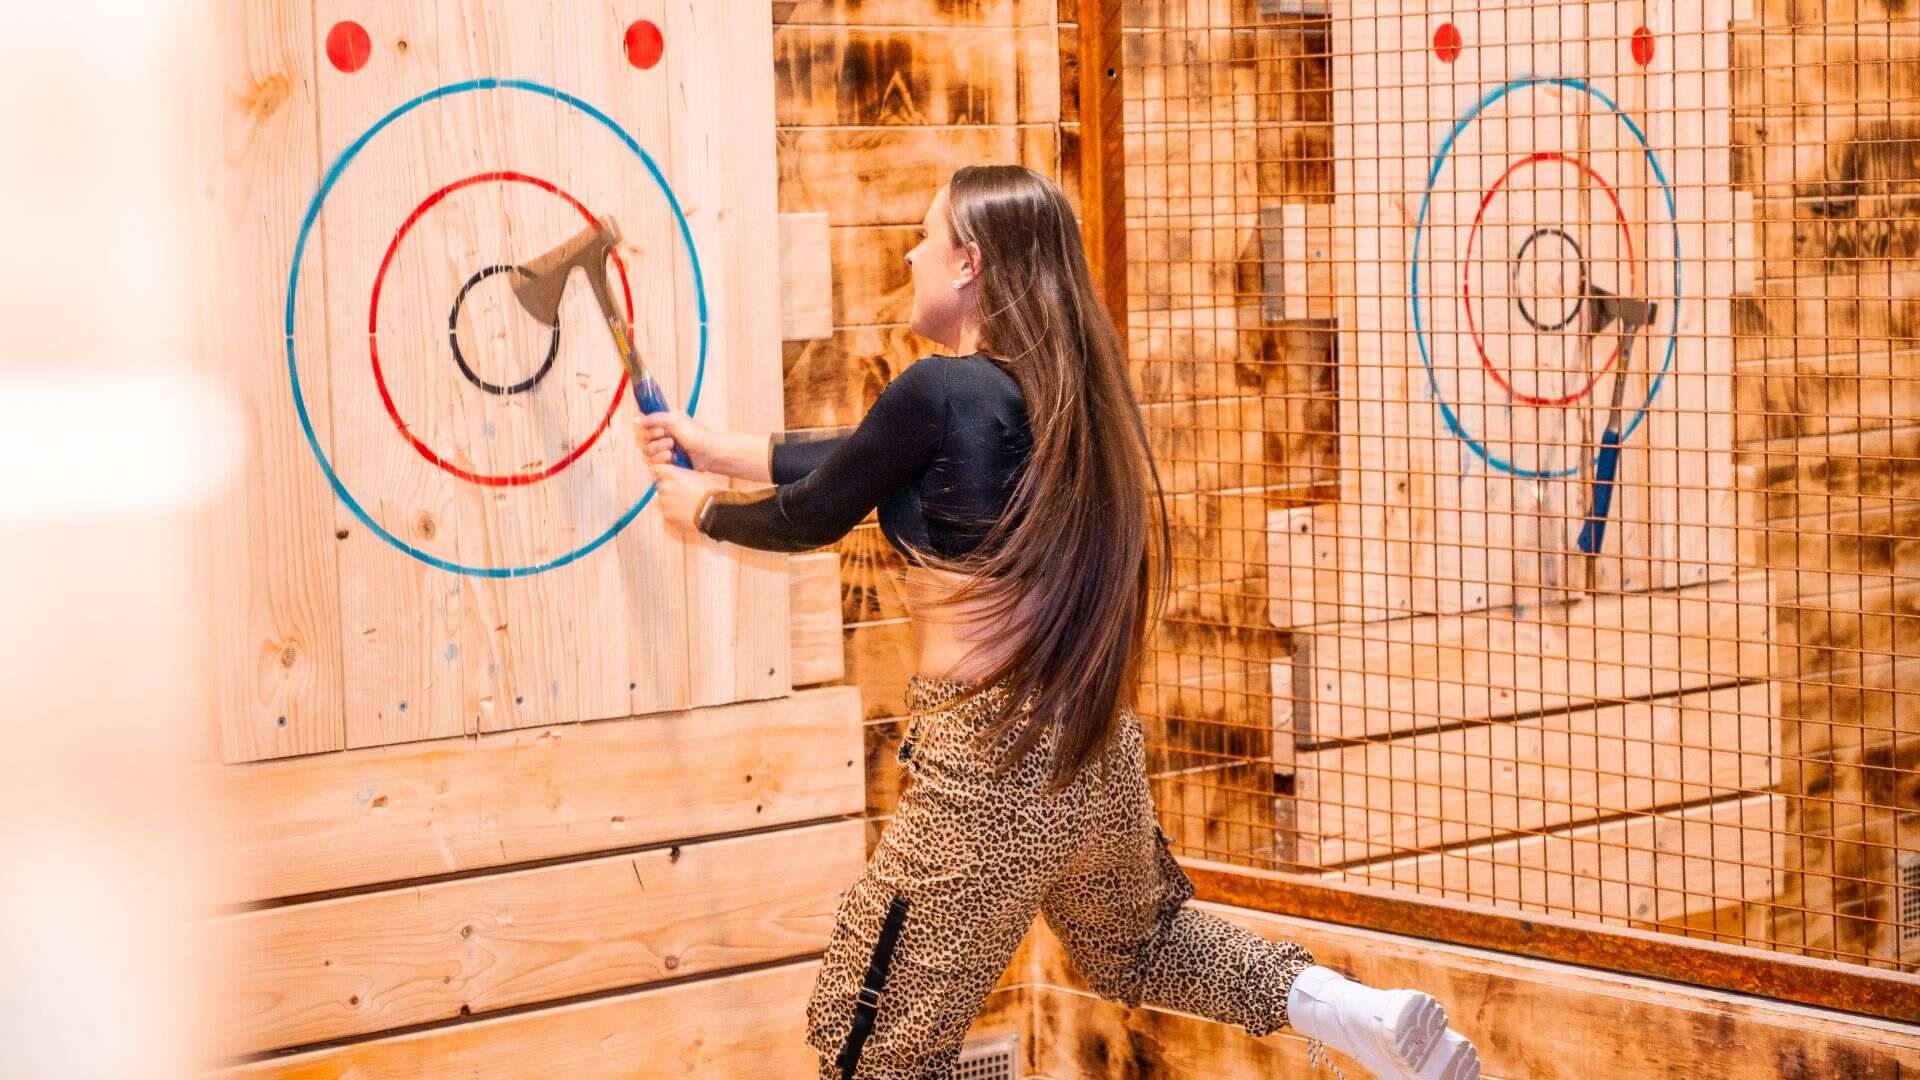 Get 15% off Axe-Throwing Sessions at Kiss My Axe with Special Concrete Playground Promo Code